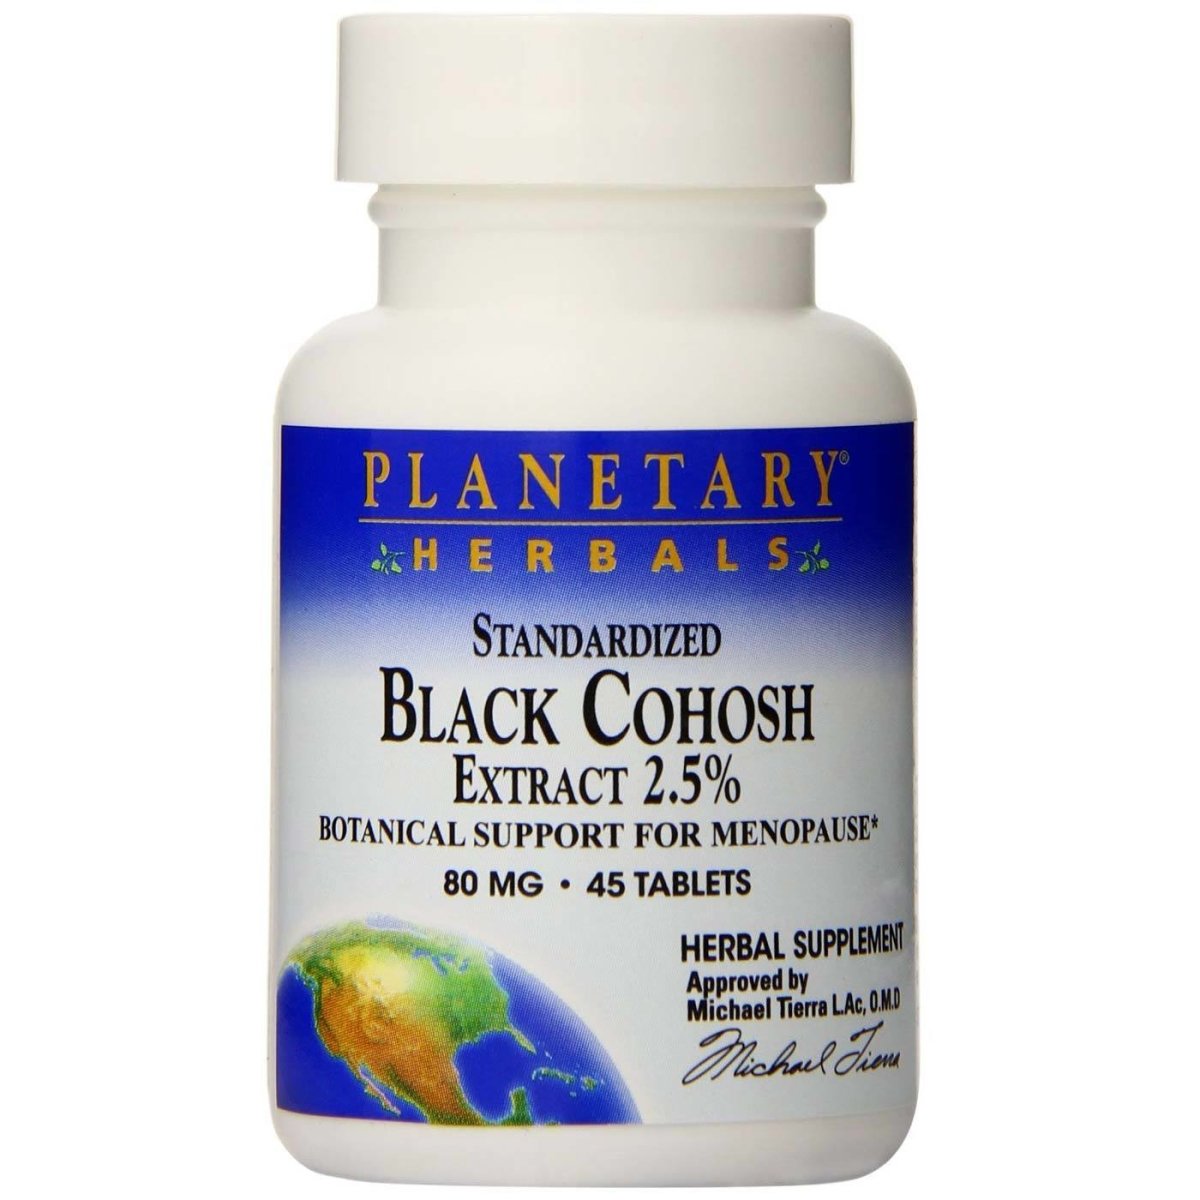 Black Cohosh Extract - 2.5% Standardized - 80 mg - 45 Tablets